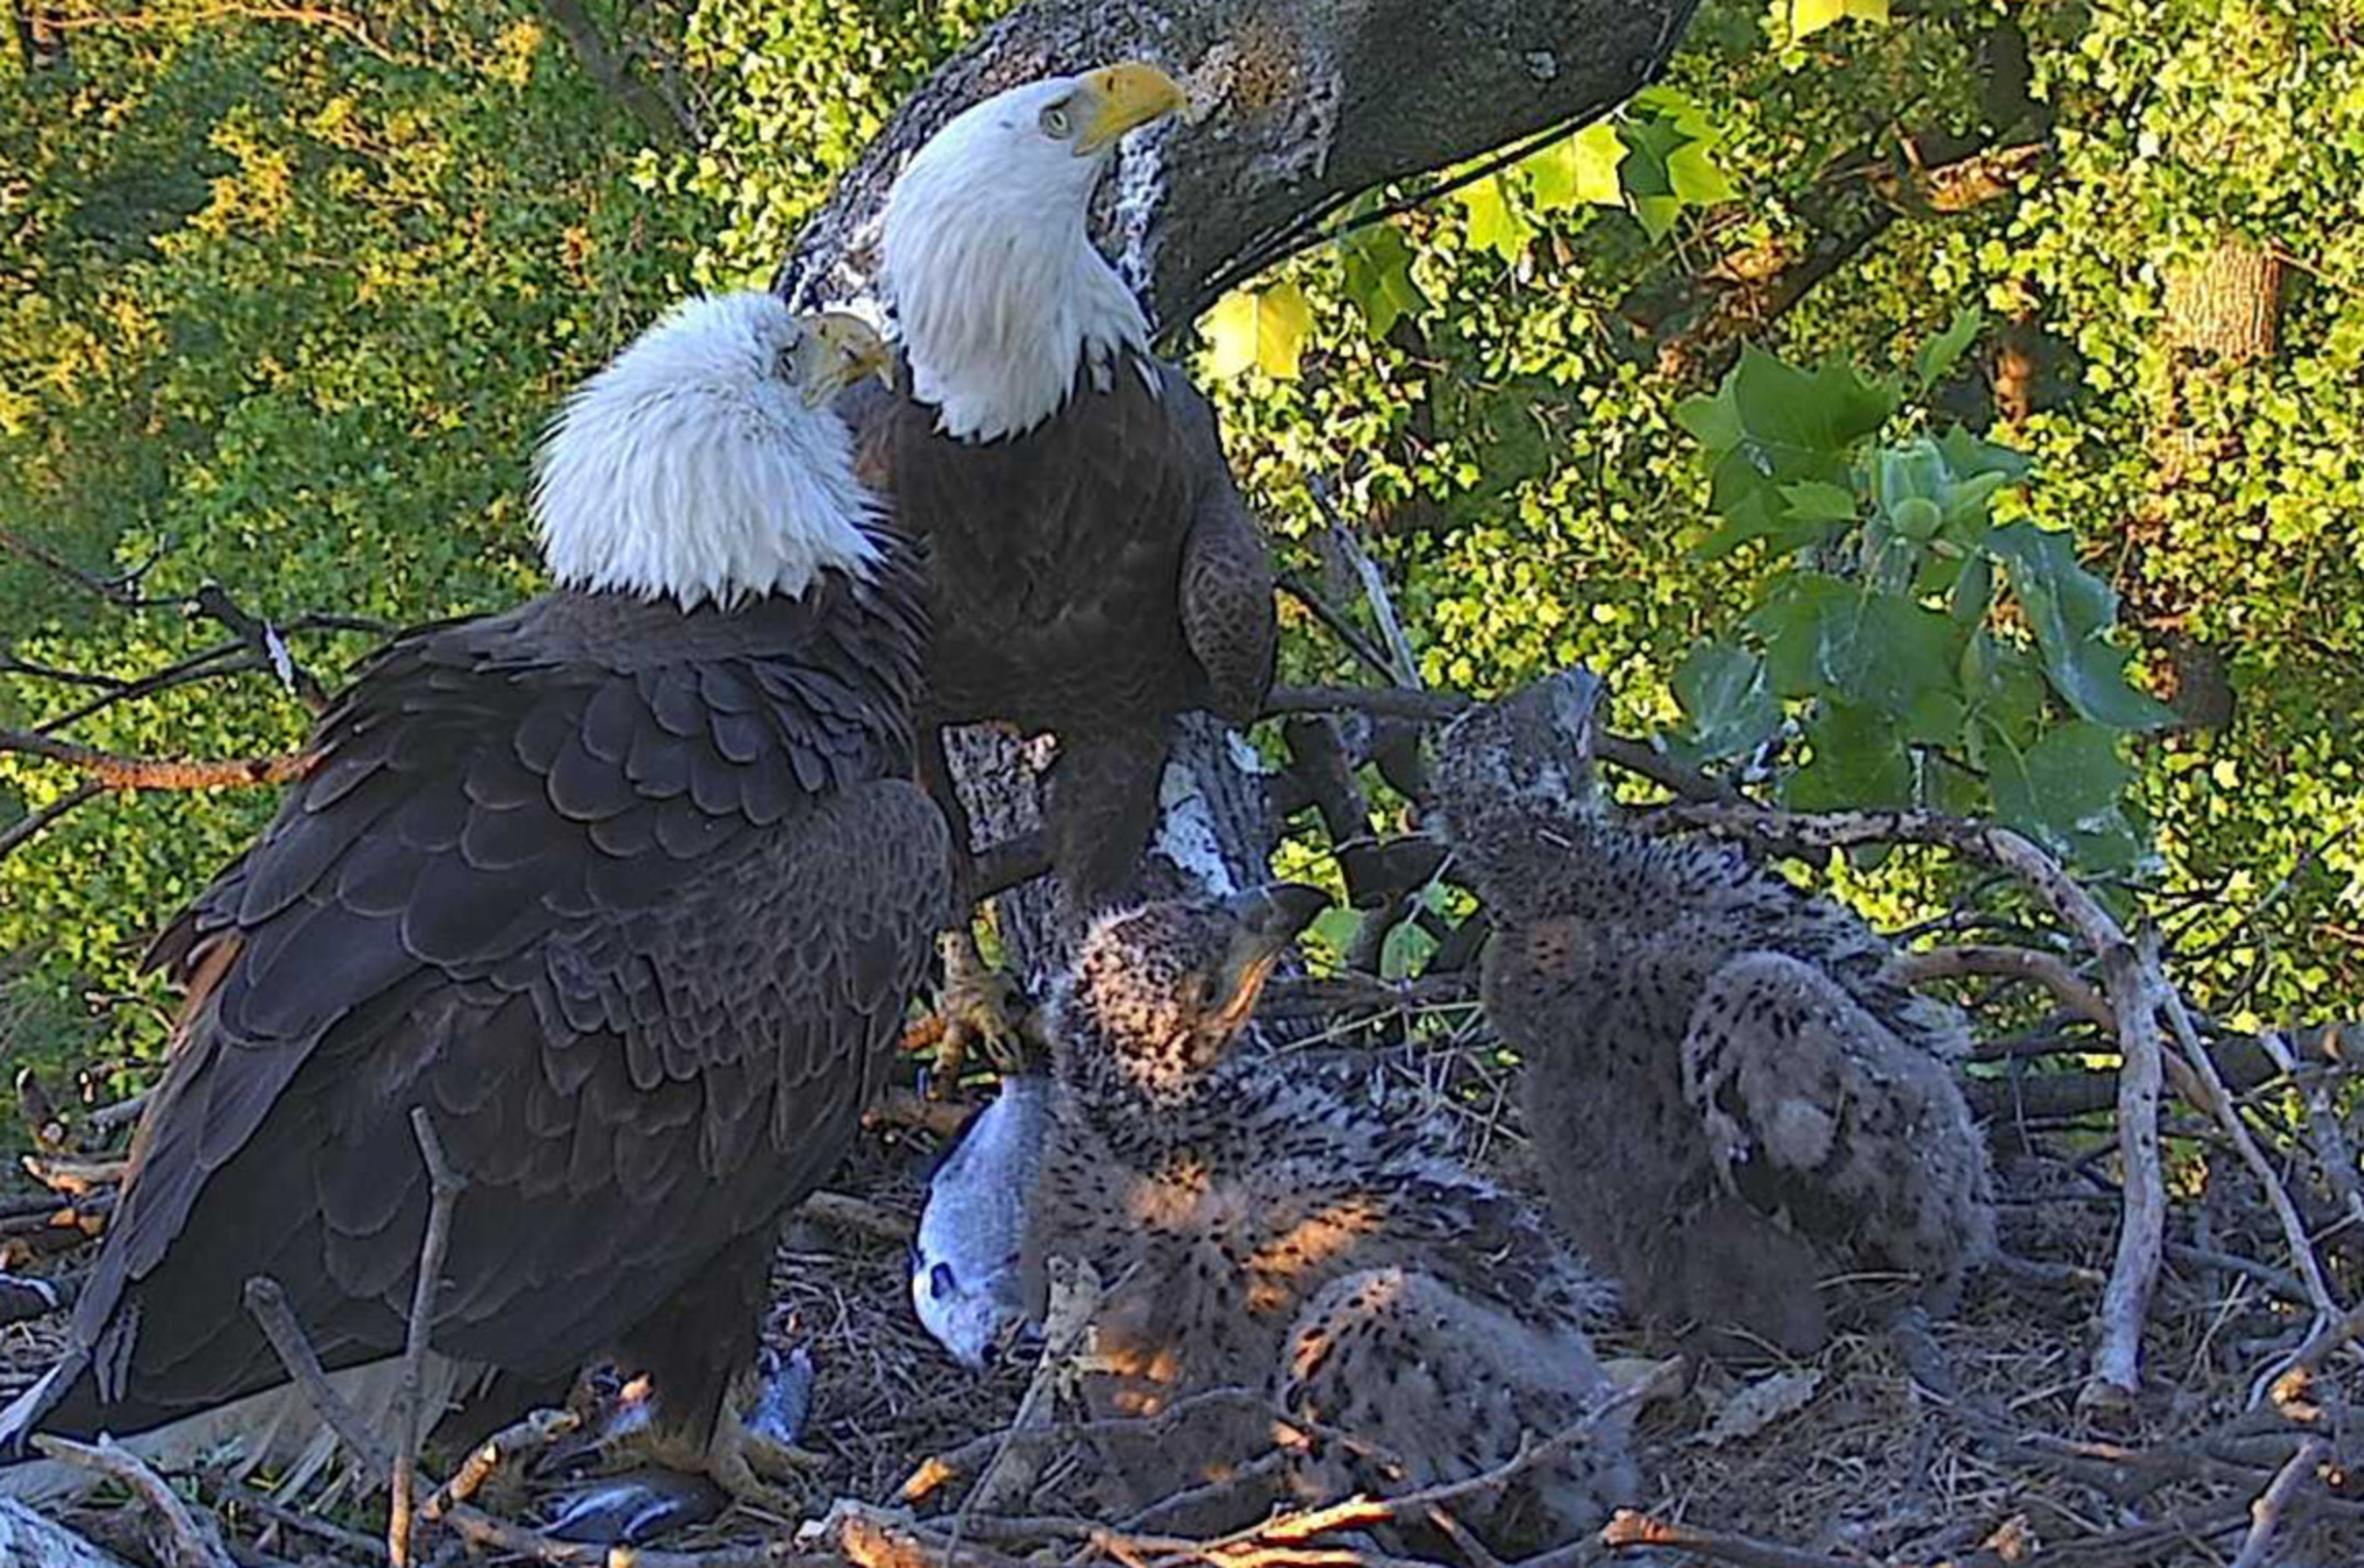 DC2 & DC3, the two adorable Bald Eaglets watched daily by hundreds of thousands of viewers on www.dceaglecam.org, are now named "Freedom" & "Liberty." Over 36,000 votes were submitted and this name pair won by more than a third of the votes. Photo Copyright American Eagle Foundation 2016